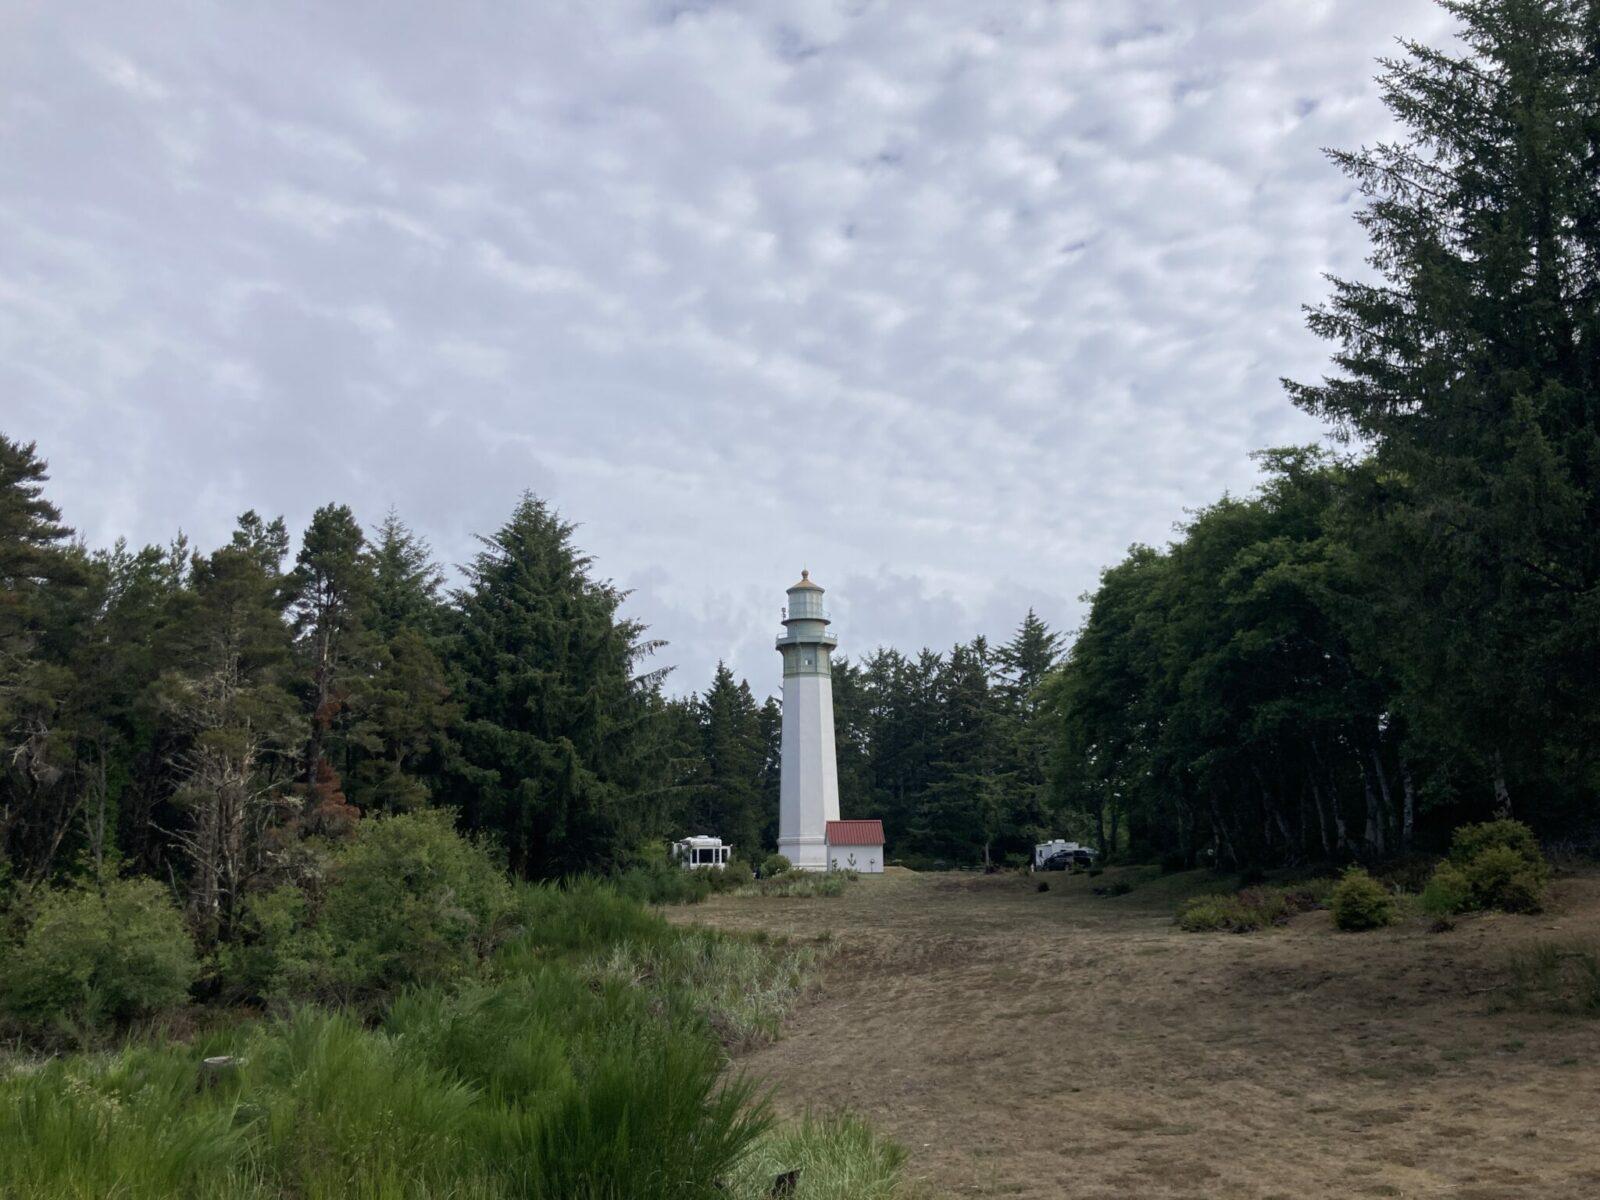 A white lighthouse with a red roof in the middle of a forest of tall trees.